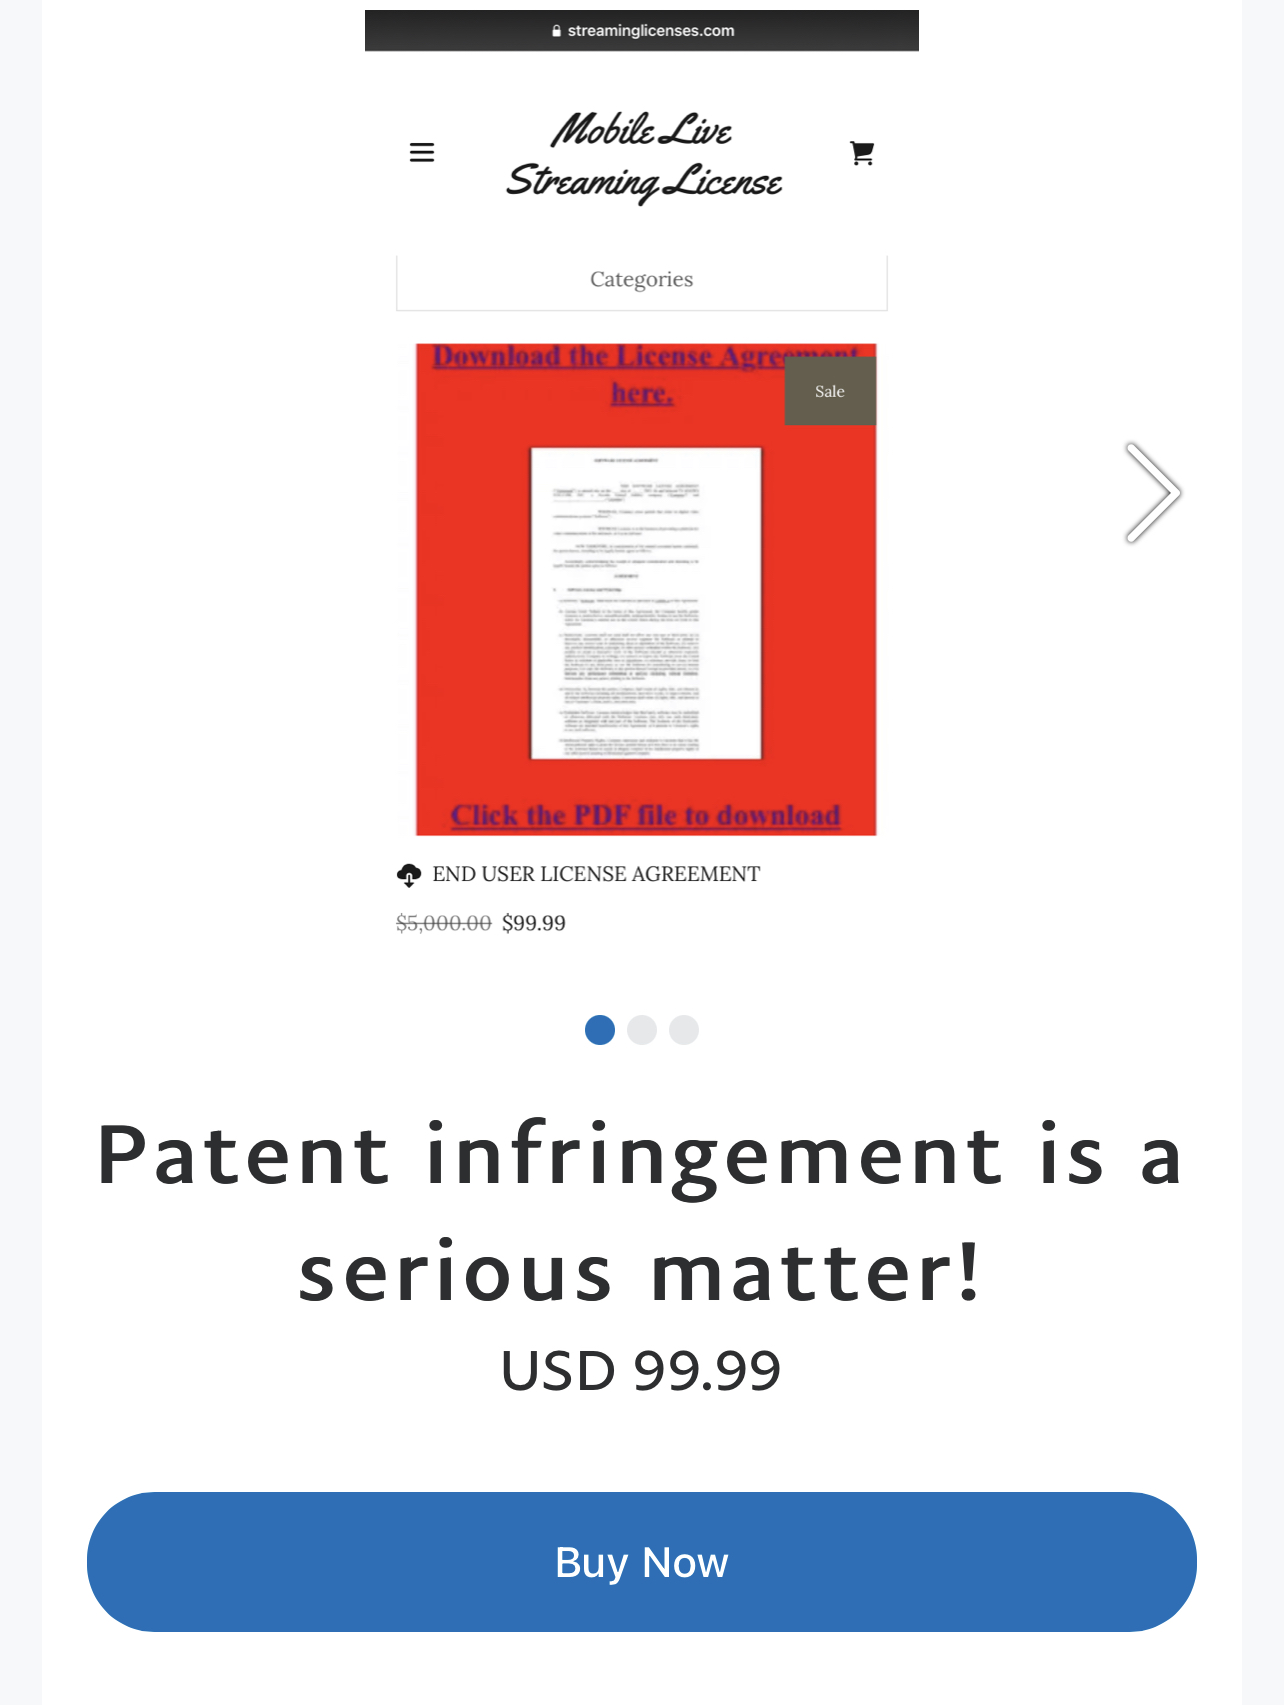 Buy Your End UserLicense Agreement Here